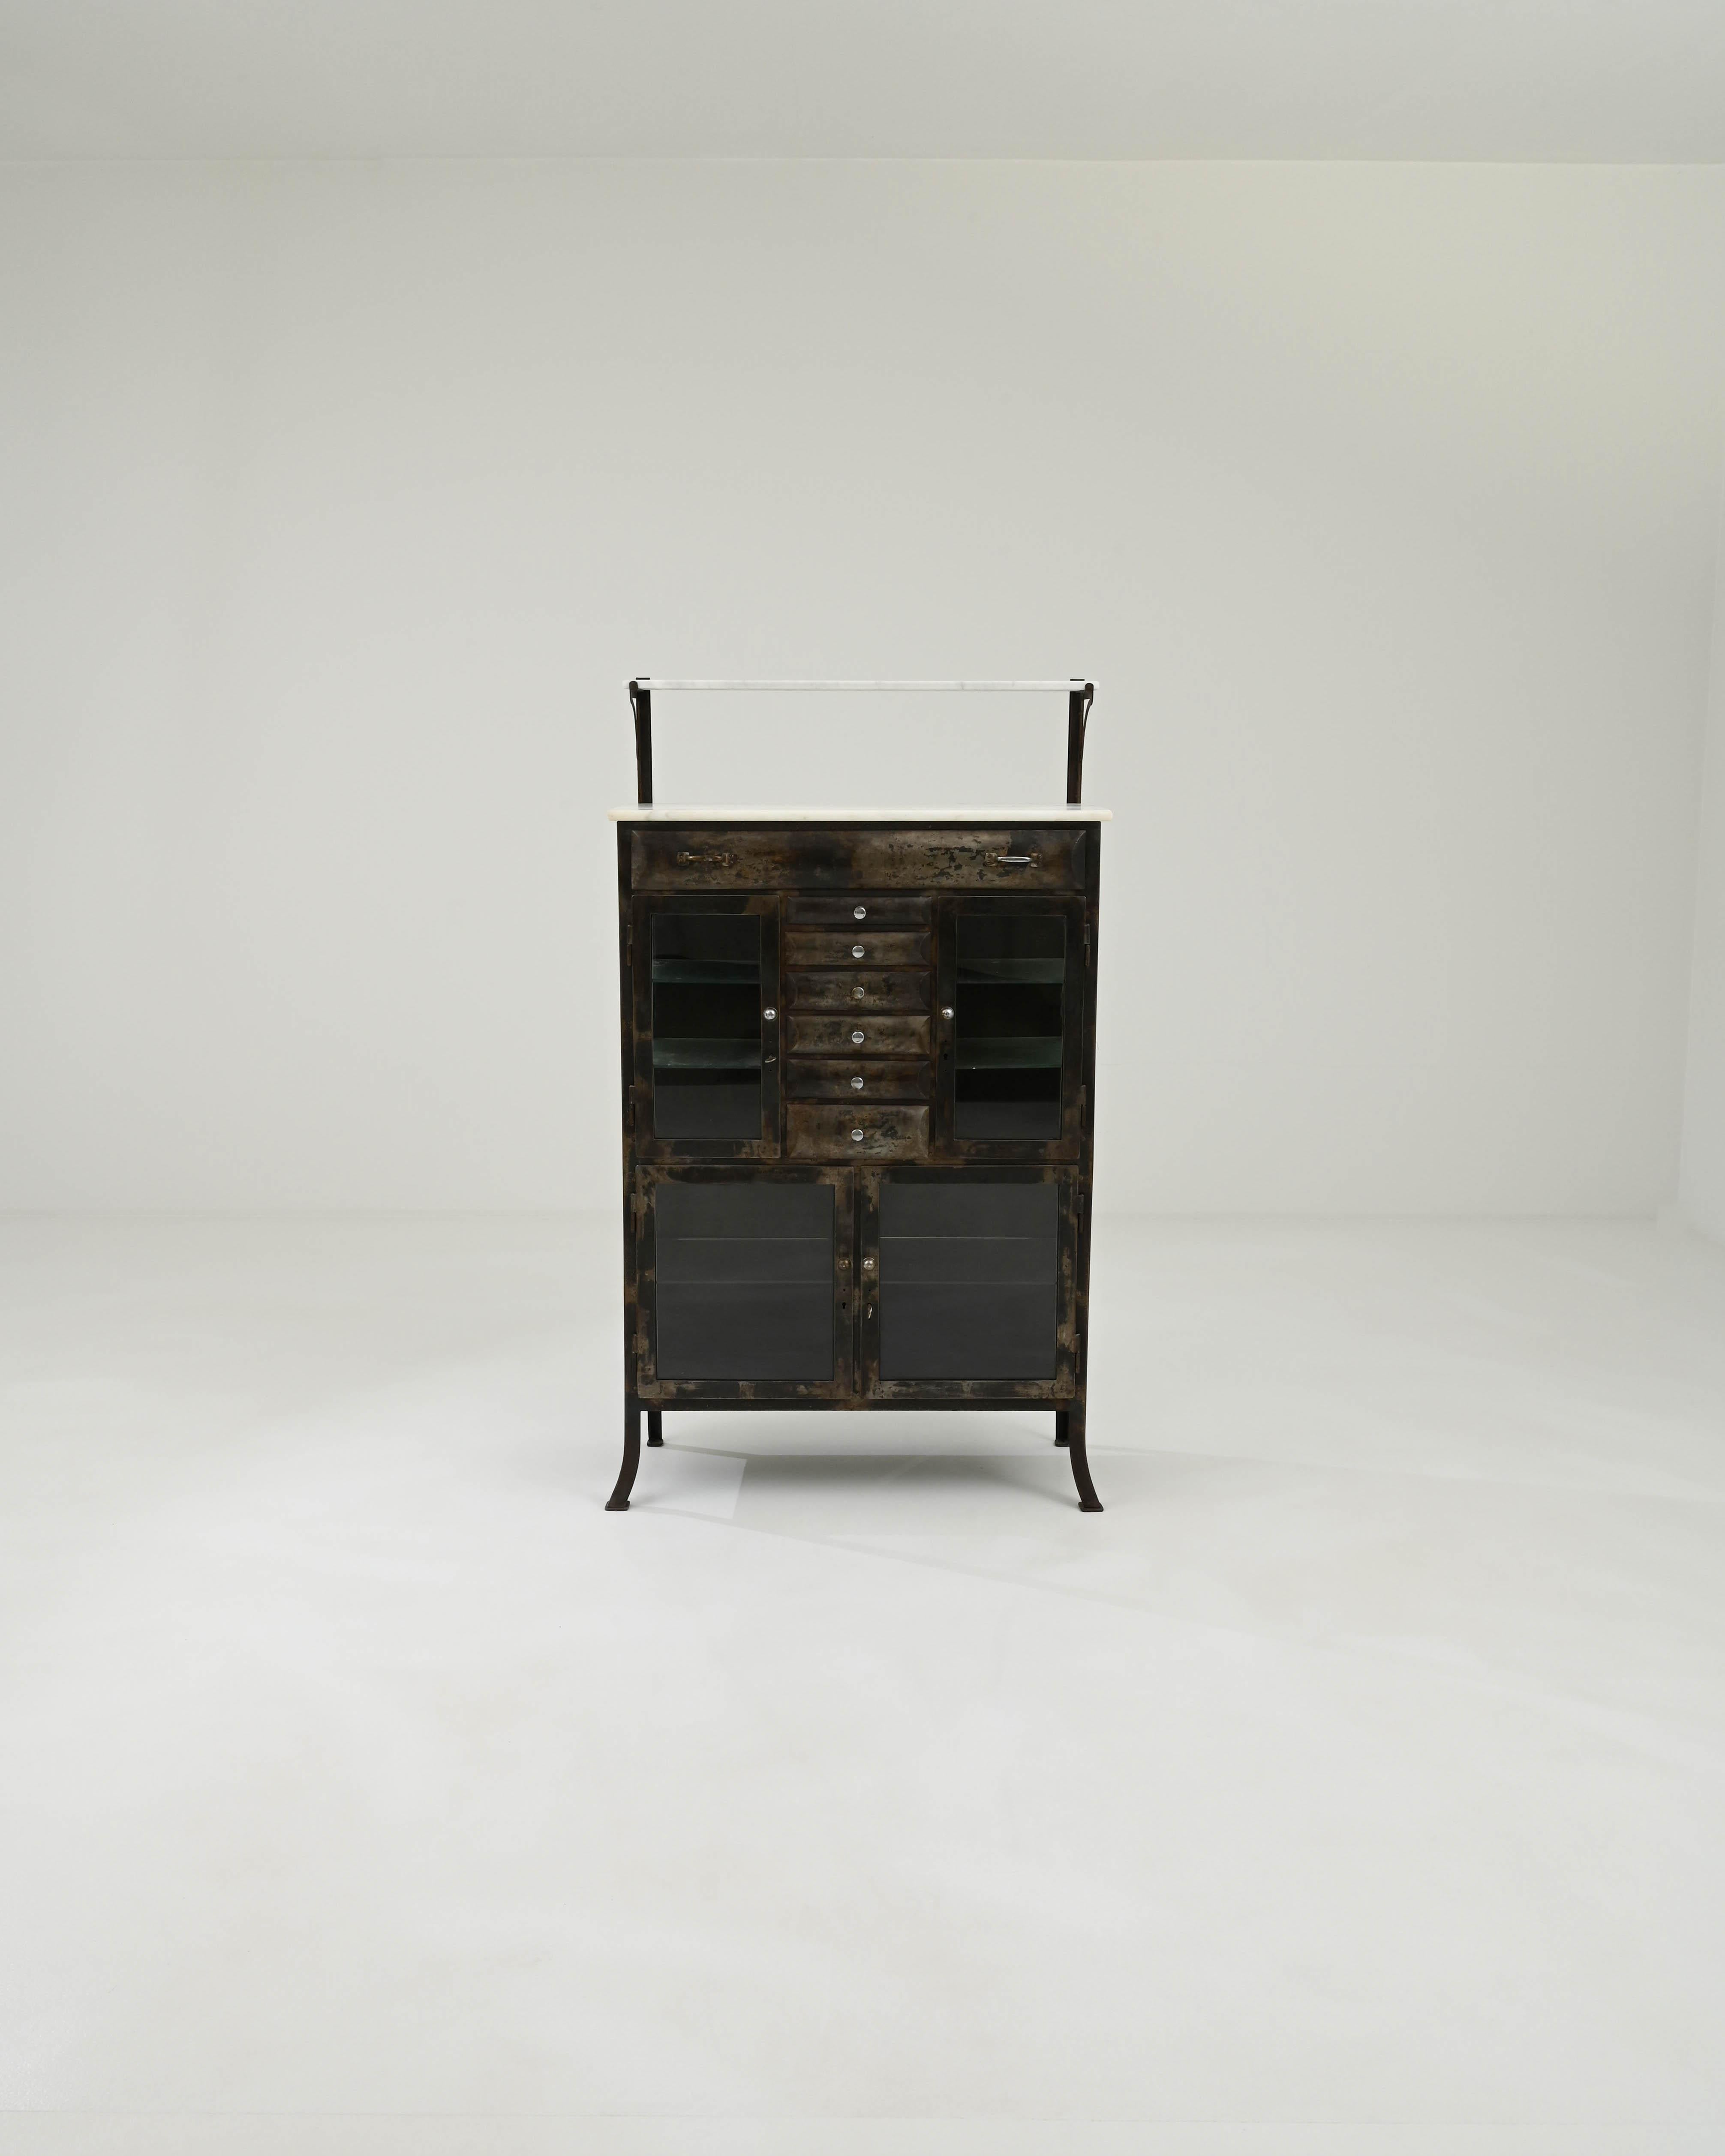 A metal vitrine created in 20th century Czechia. Industrial yet refined, this one of a kind display cabinet invokes a sense of delicately organized poise and timeless history. The weathered and patinated metal creates a dazzling array of hues and